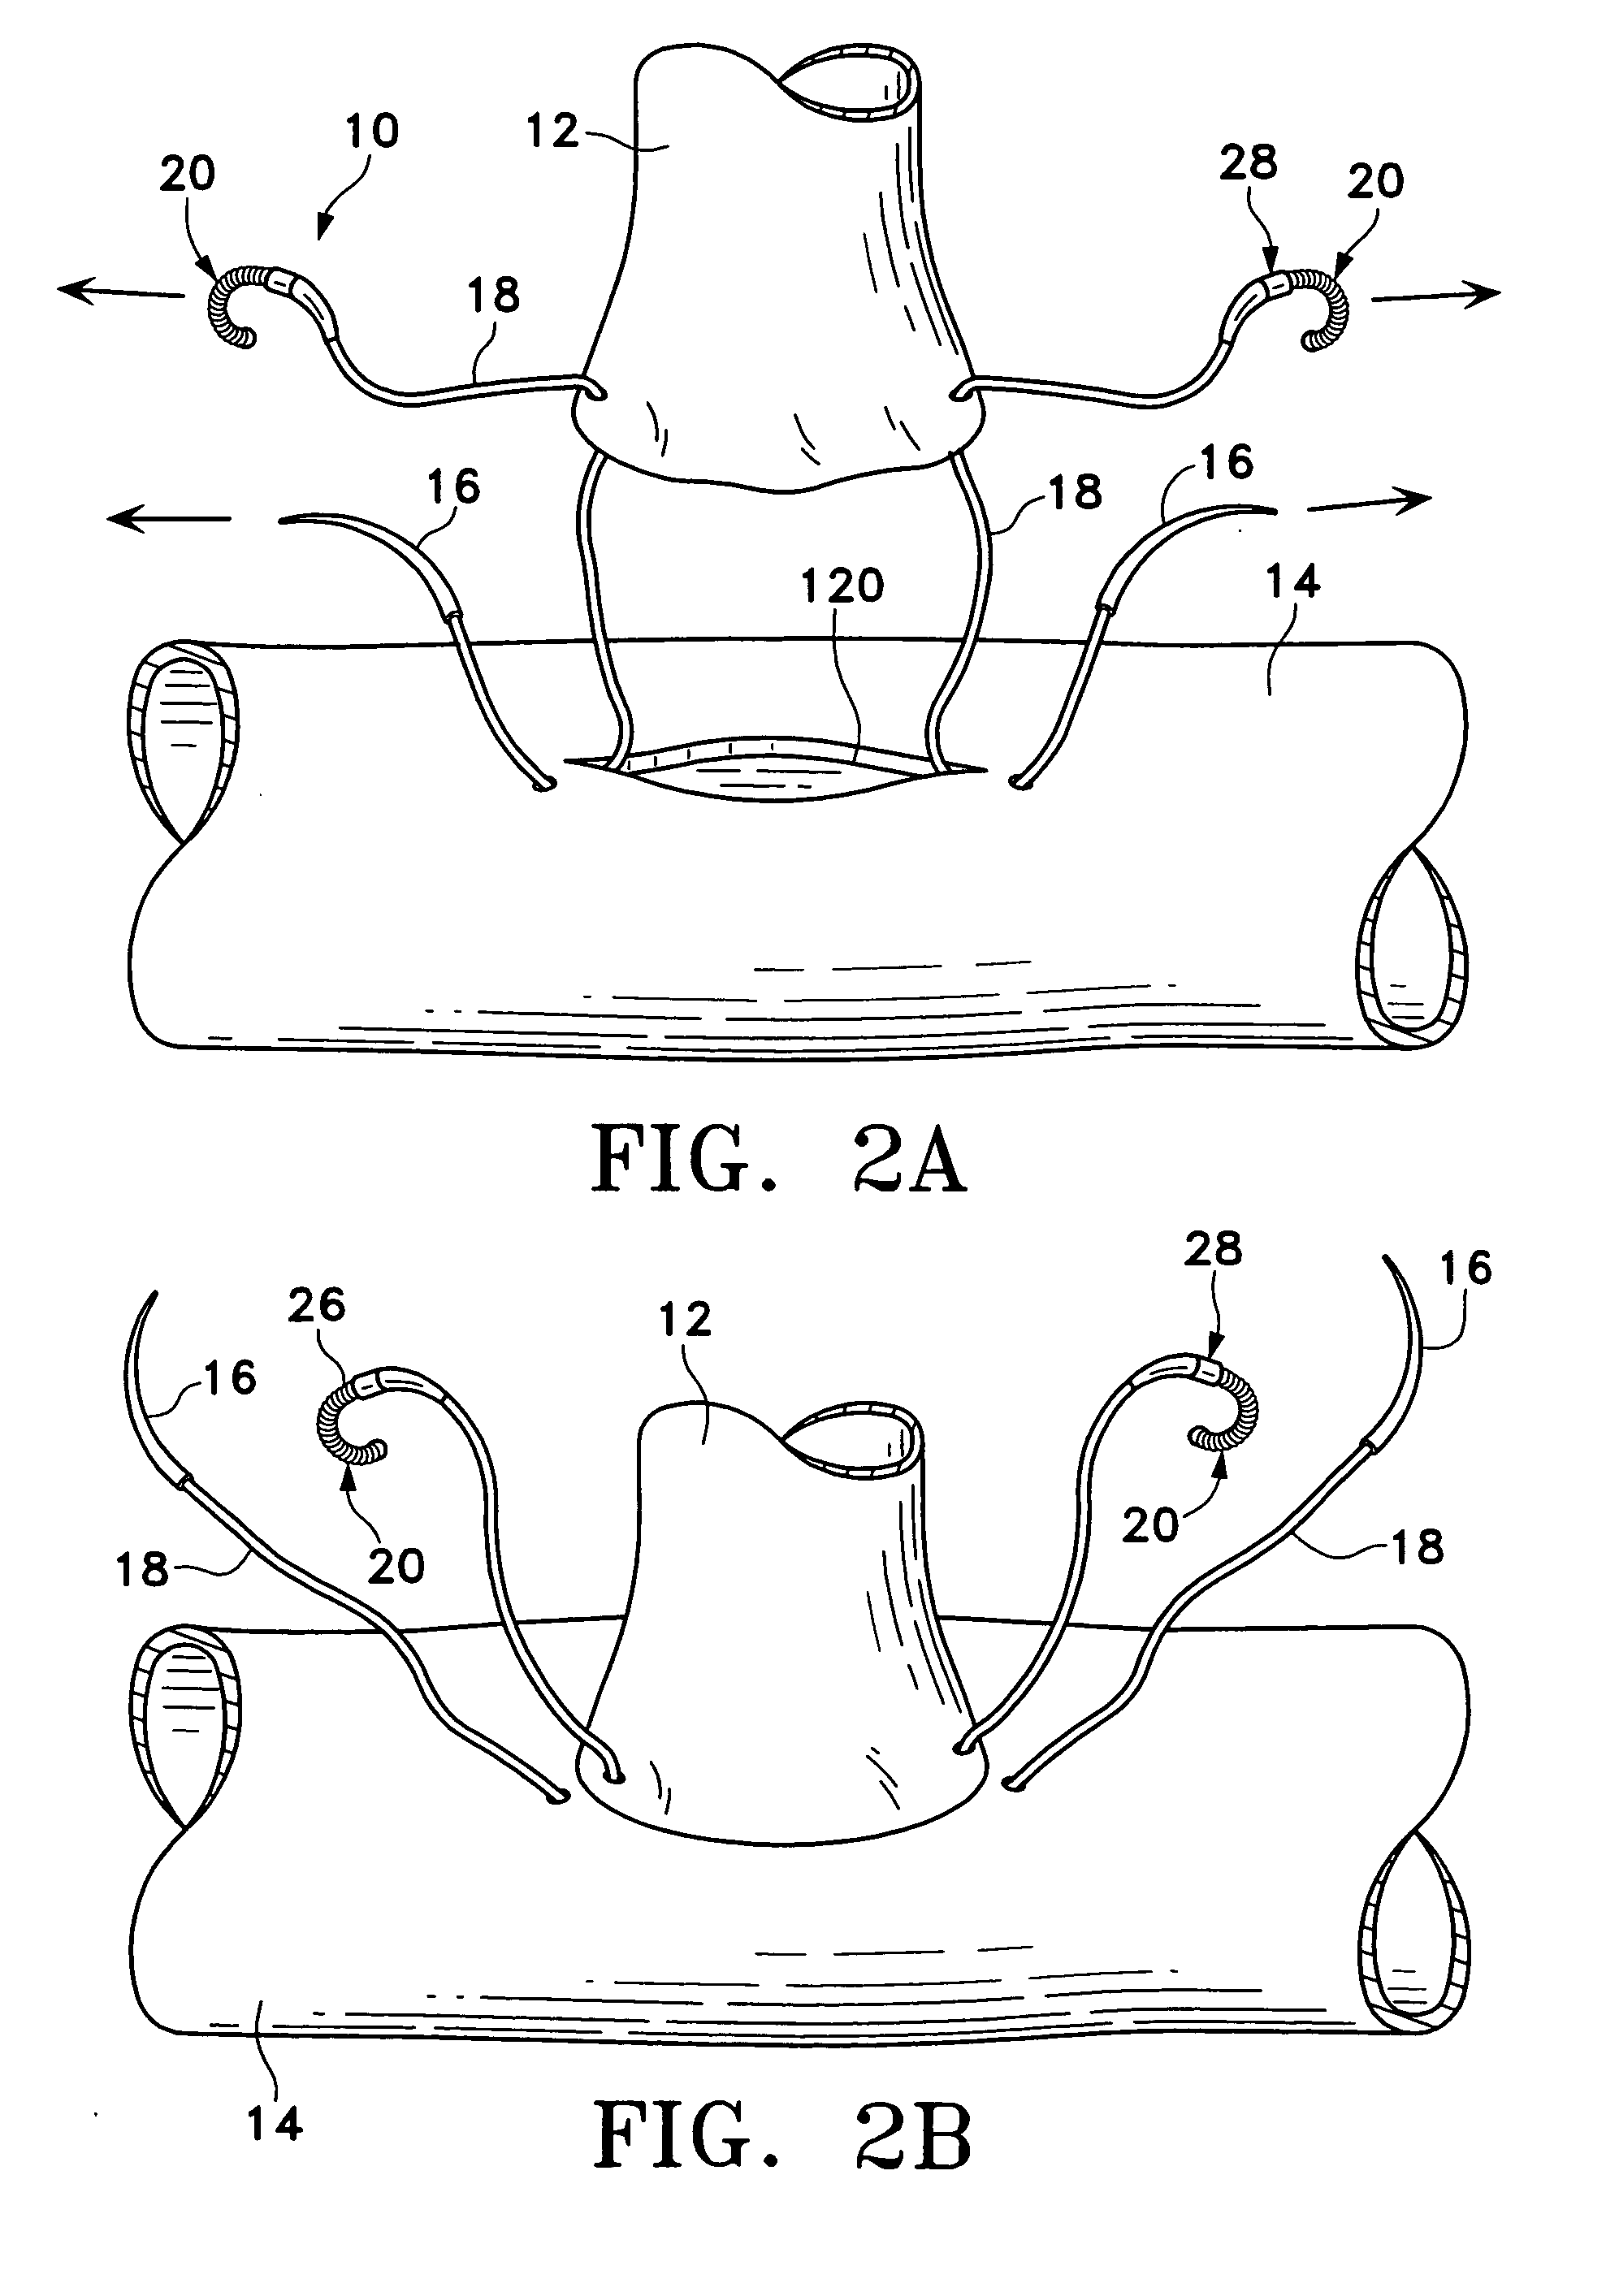 Tissue connector apparatus and methods